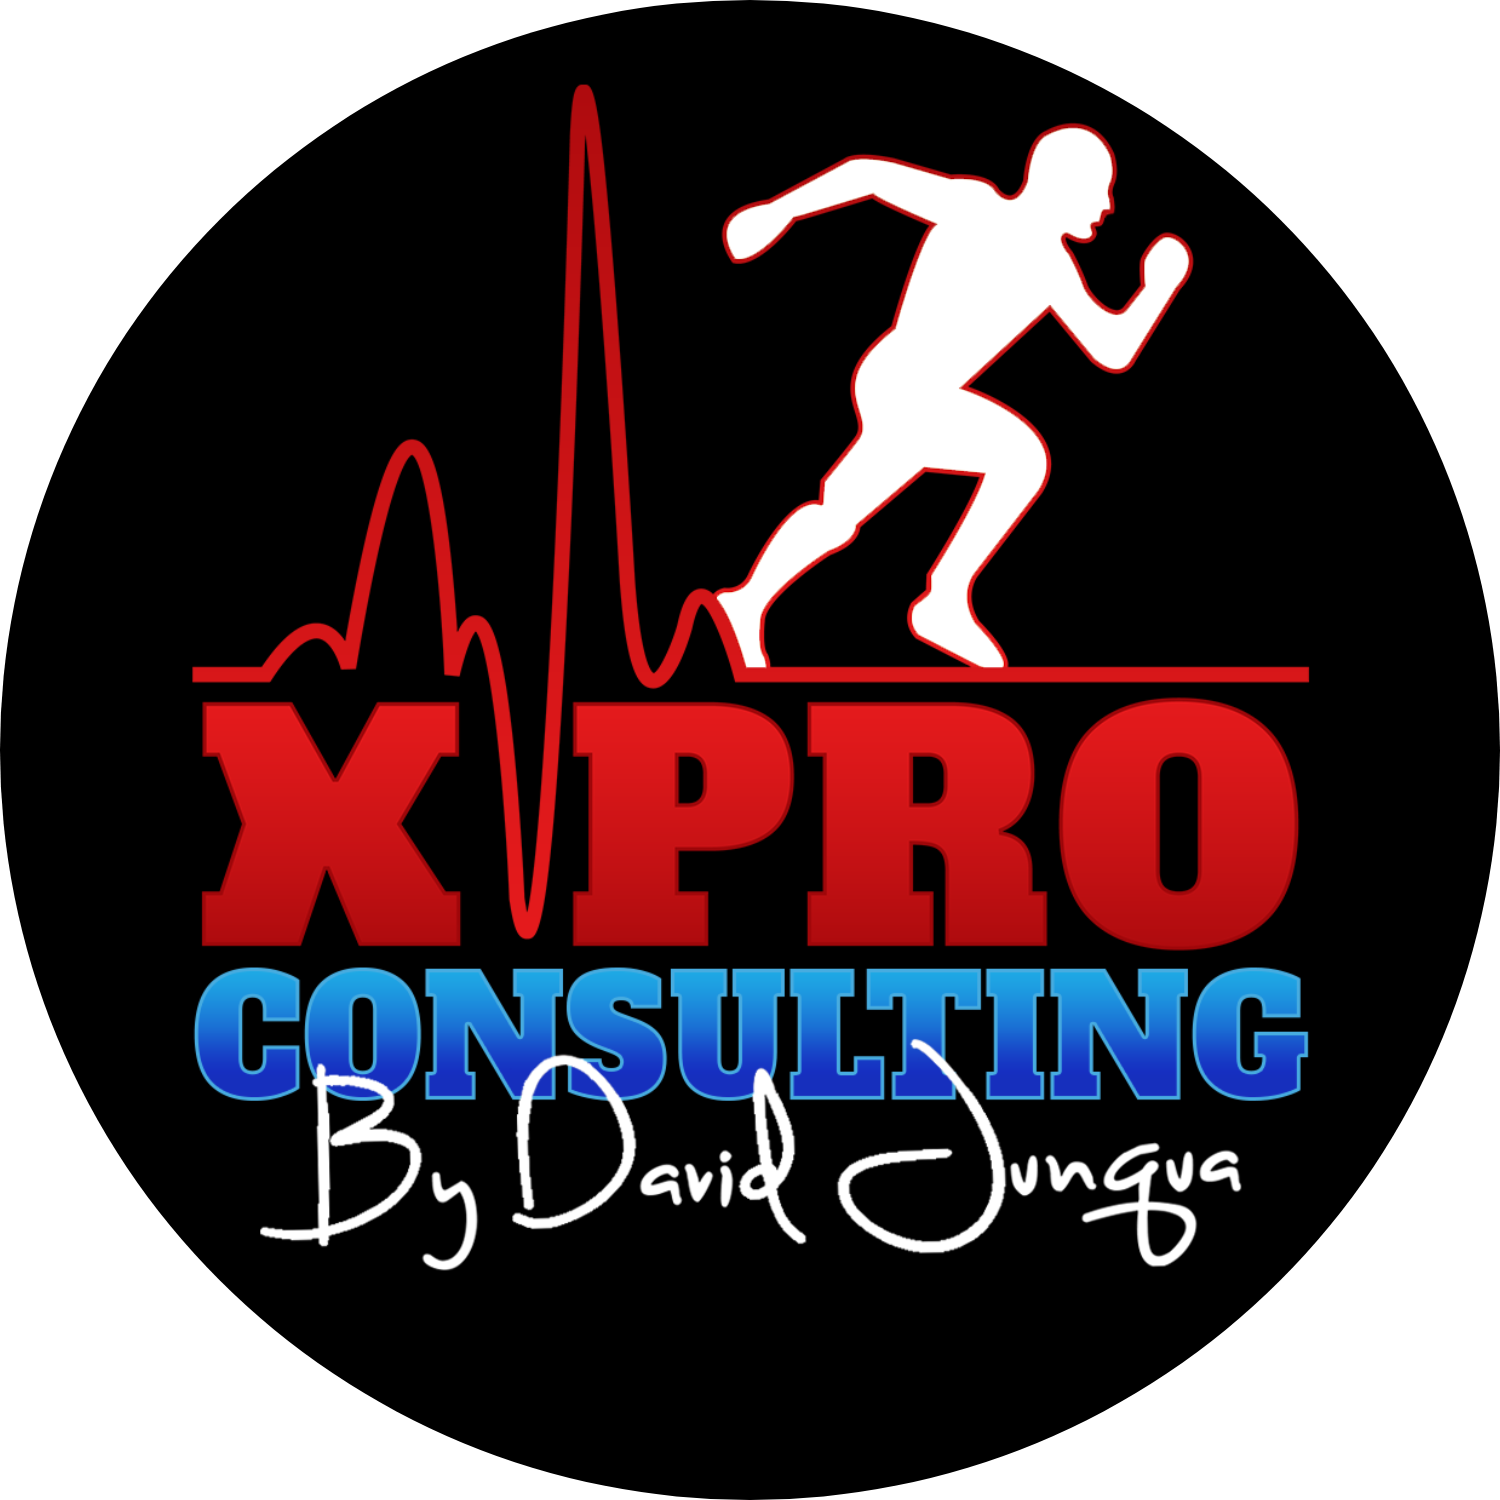 XPRO CONSULTING